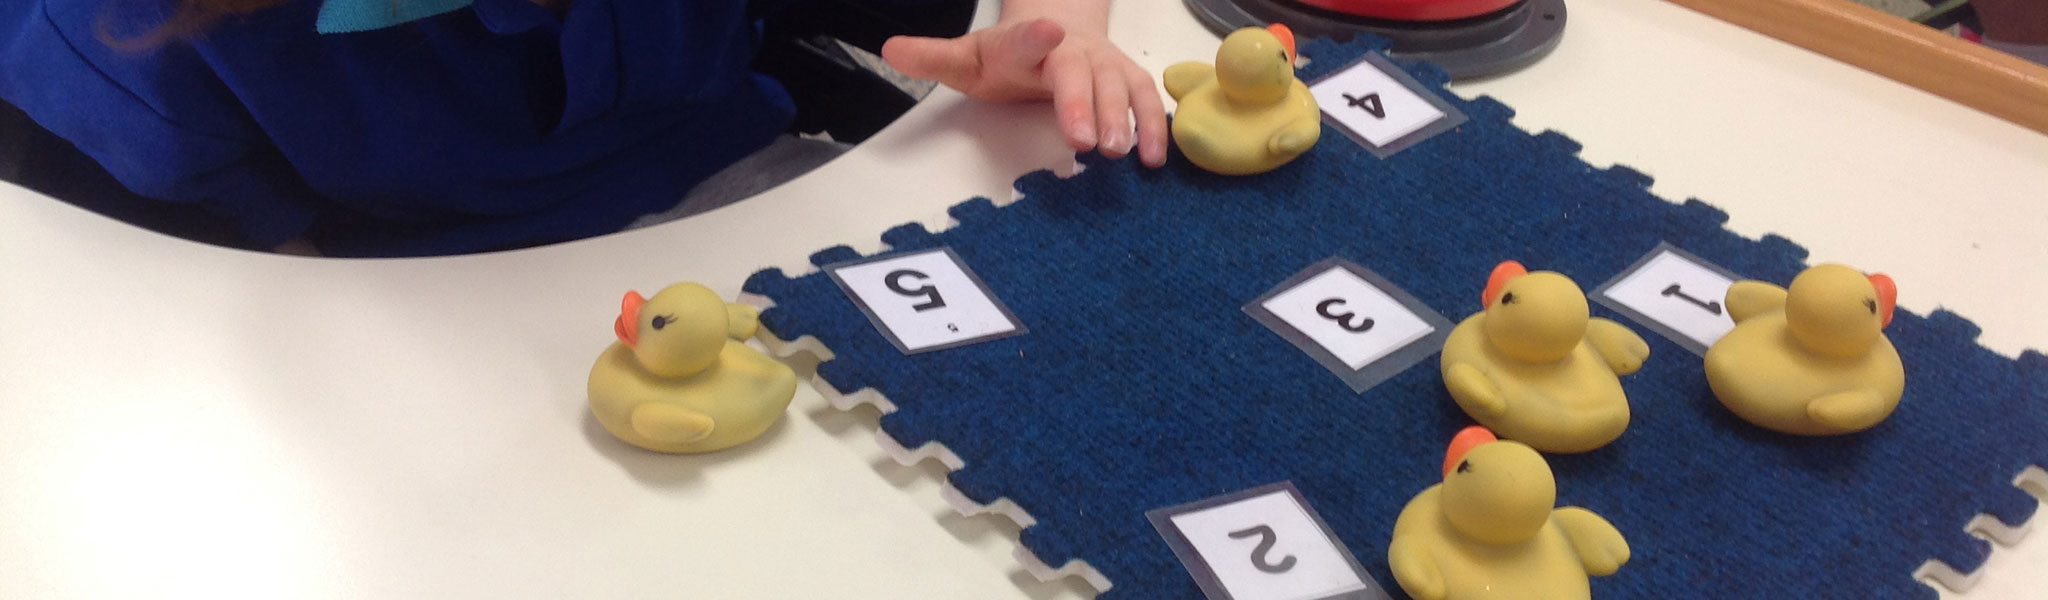 Rubber ducks and numbers